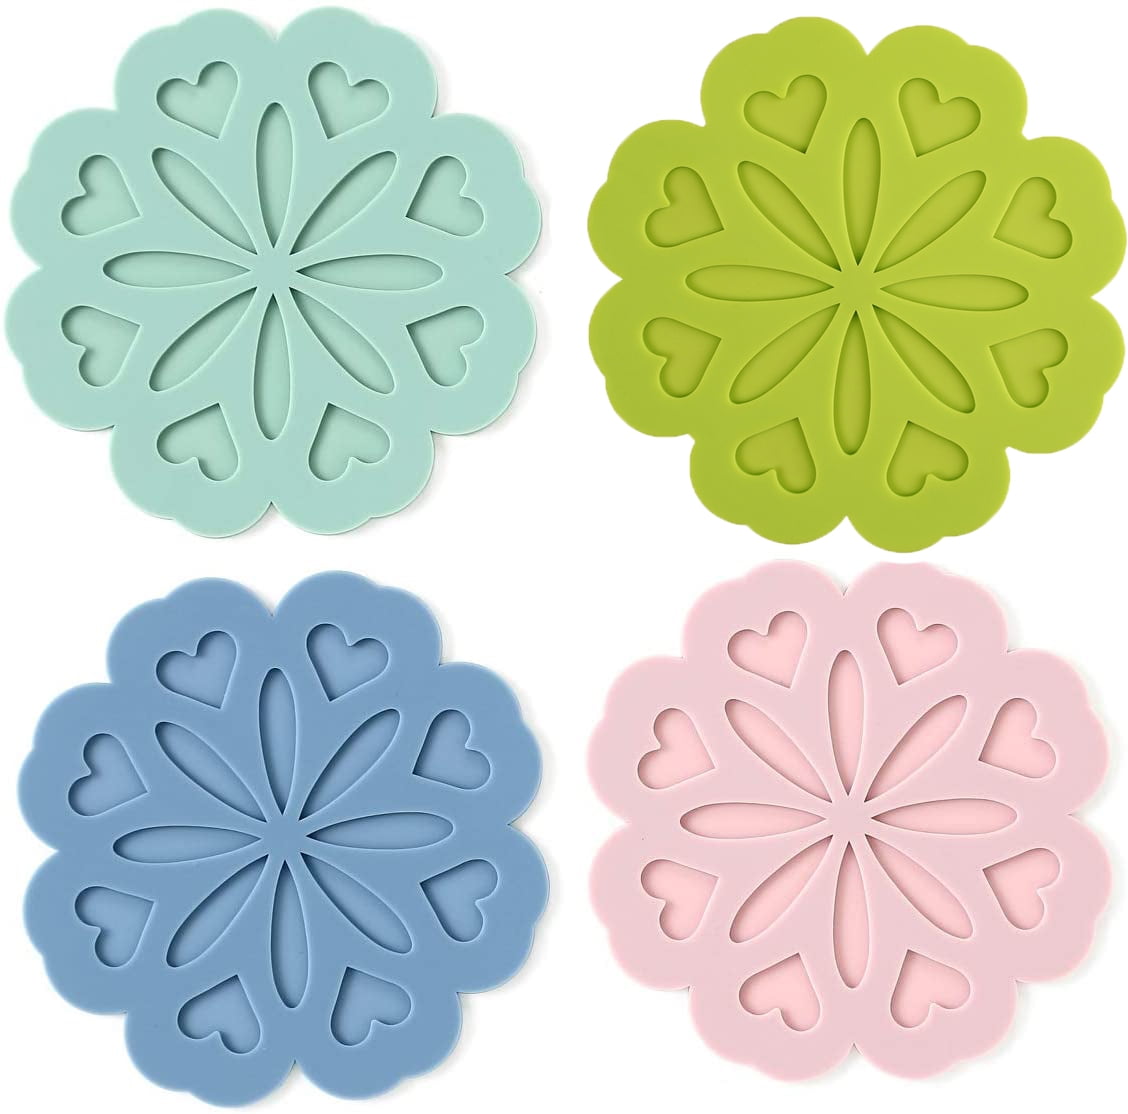 Silicone Pot Pads ,Trivet Mat,Place mats,Coasters,Insulation Mat for Hot Dishes/Pot/Bowl/Teapot/Hot Pot Holders,Non-slip,Durable Kitchen Tool 3 pack 